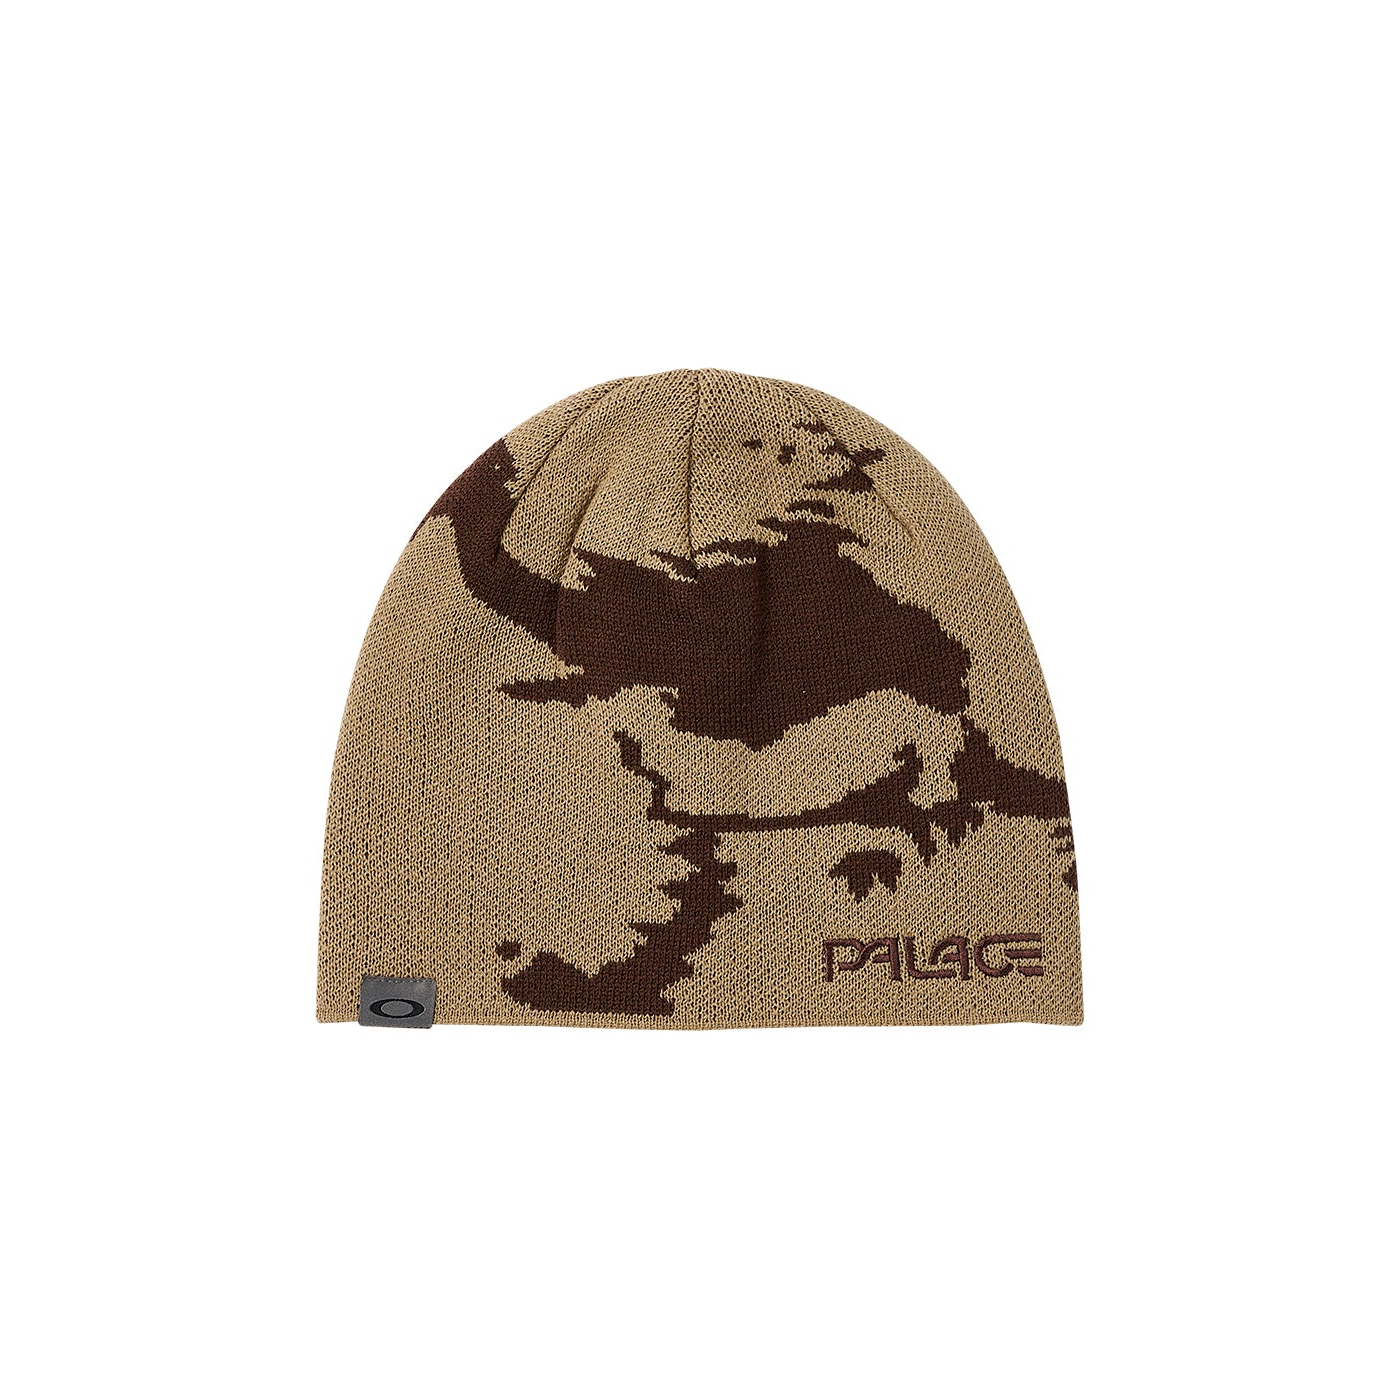 Thumbnail PALACE OAKLEY BEANIE SAND / BROWN one color